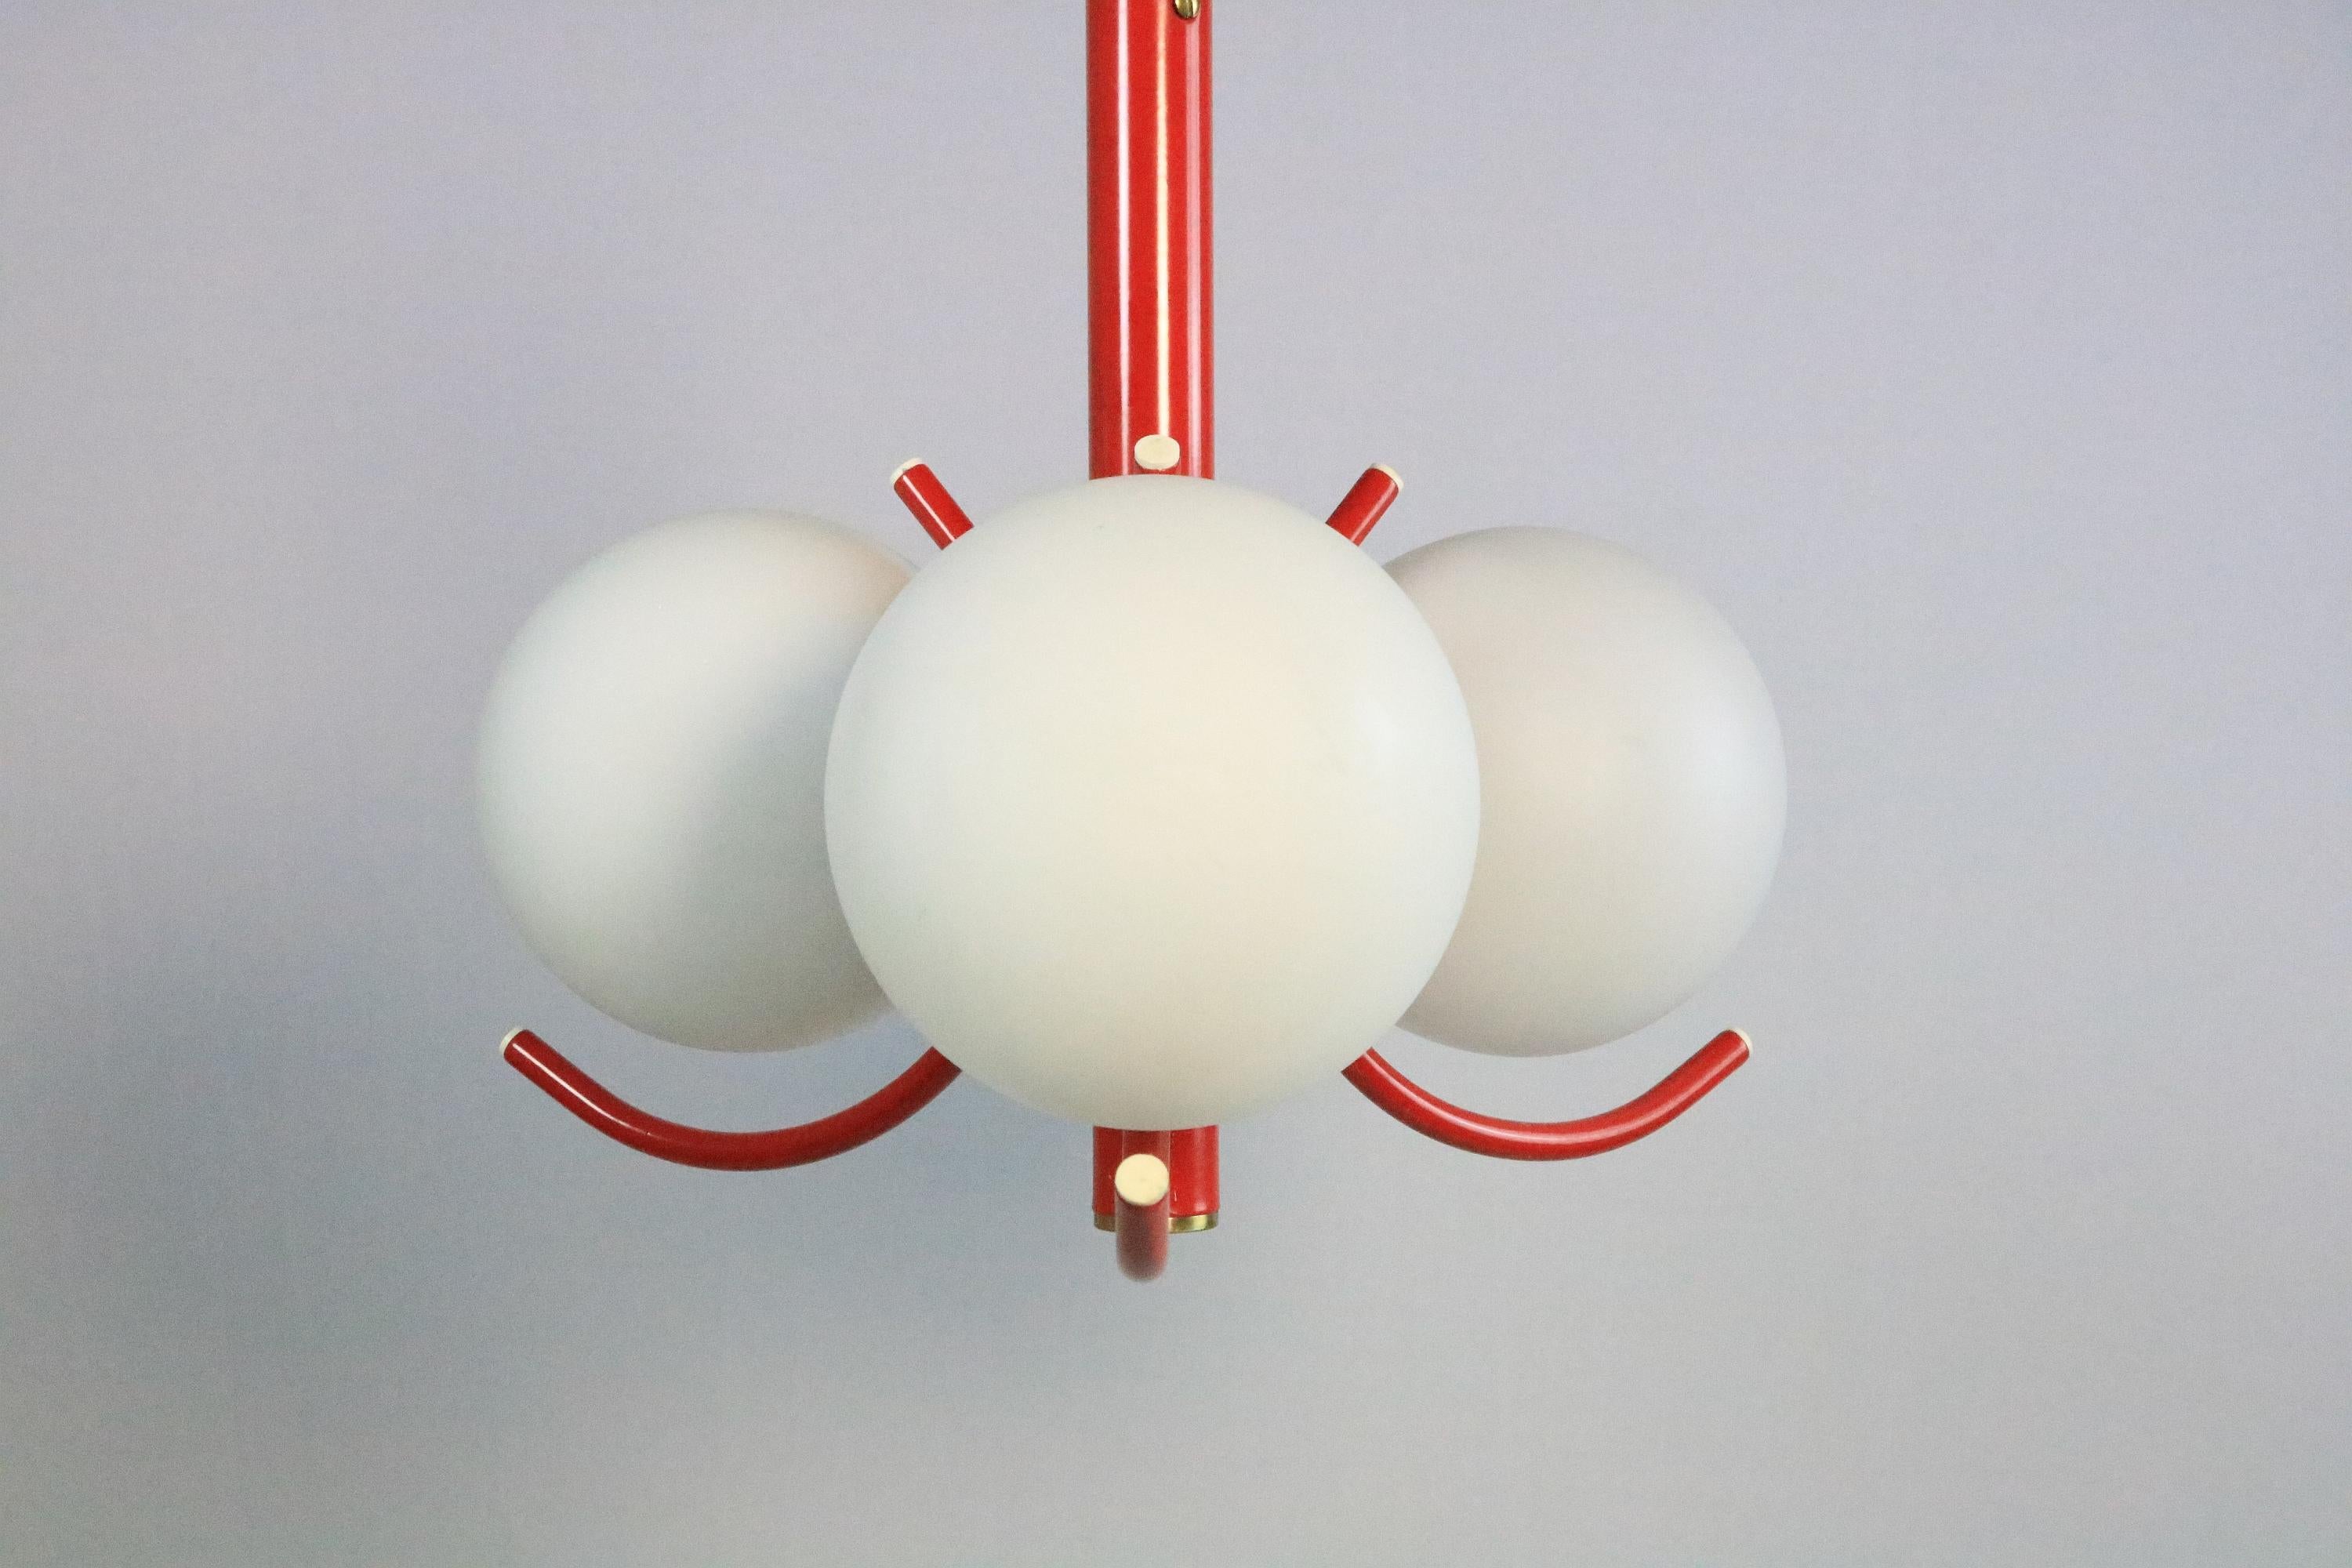 Small, attractive sputnik lamp with three opal glass globes. Red metal frame.
 
Manufacturer: Richard Essig
 
Height: 65 cm / 25.6 inches
Diameter: approx. 35 cm / 13.78 inches

Very good condition.
 
A matching white sputnik chandelier can be found